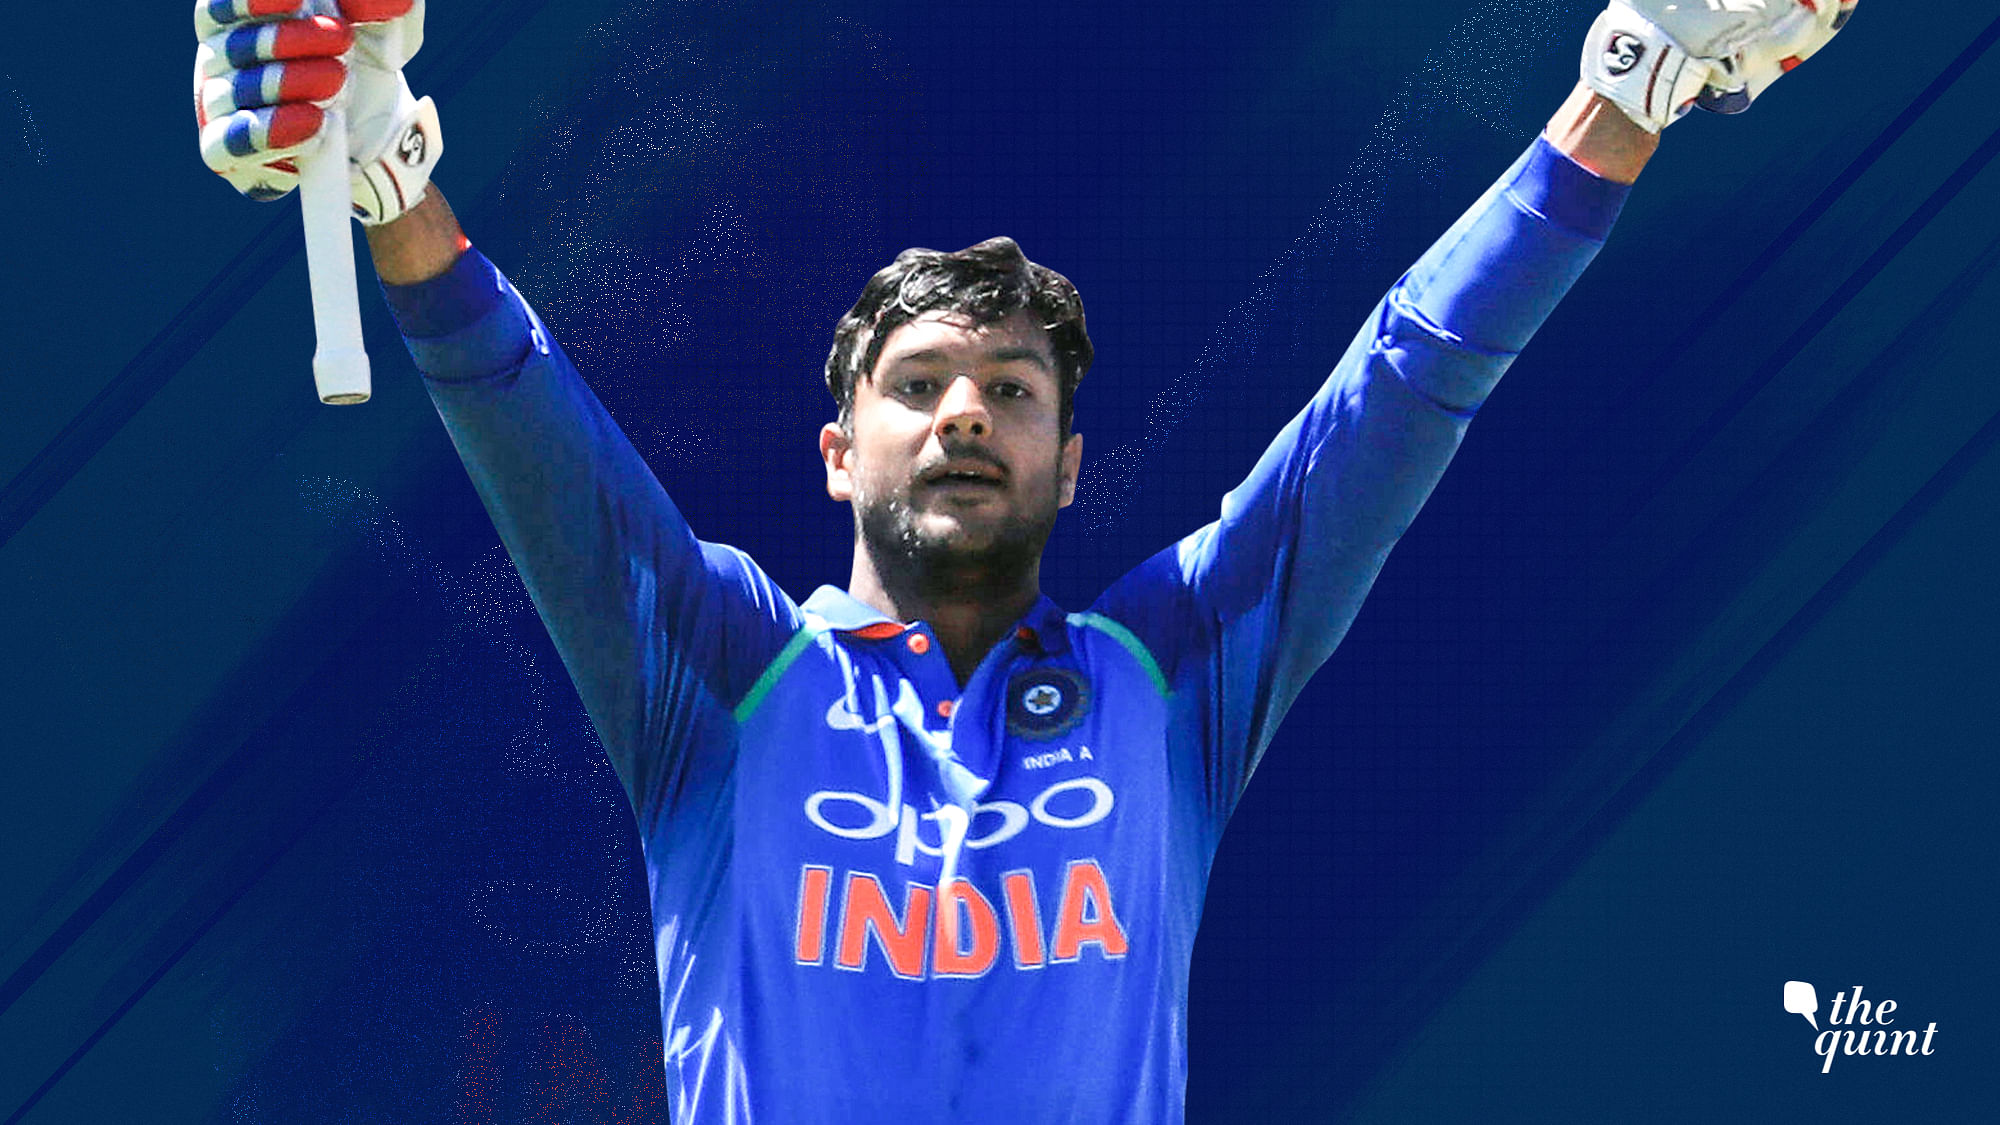 After record-breaking domestic season and numerous snubs, Mayank Agarwal has finally found his way to the Indian Test side that will play the touring West Indies side.